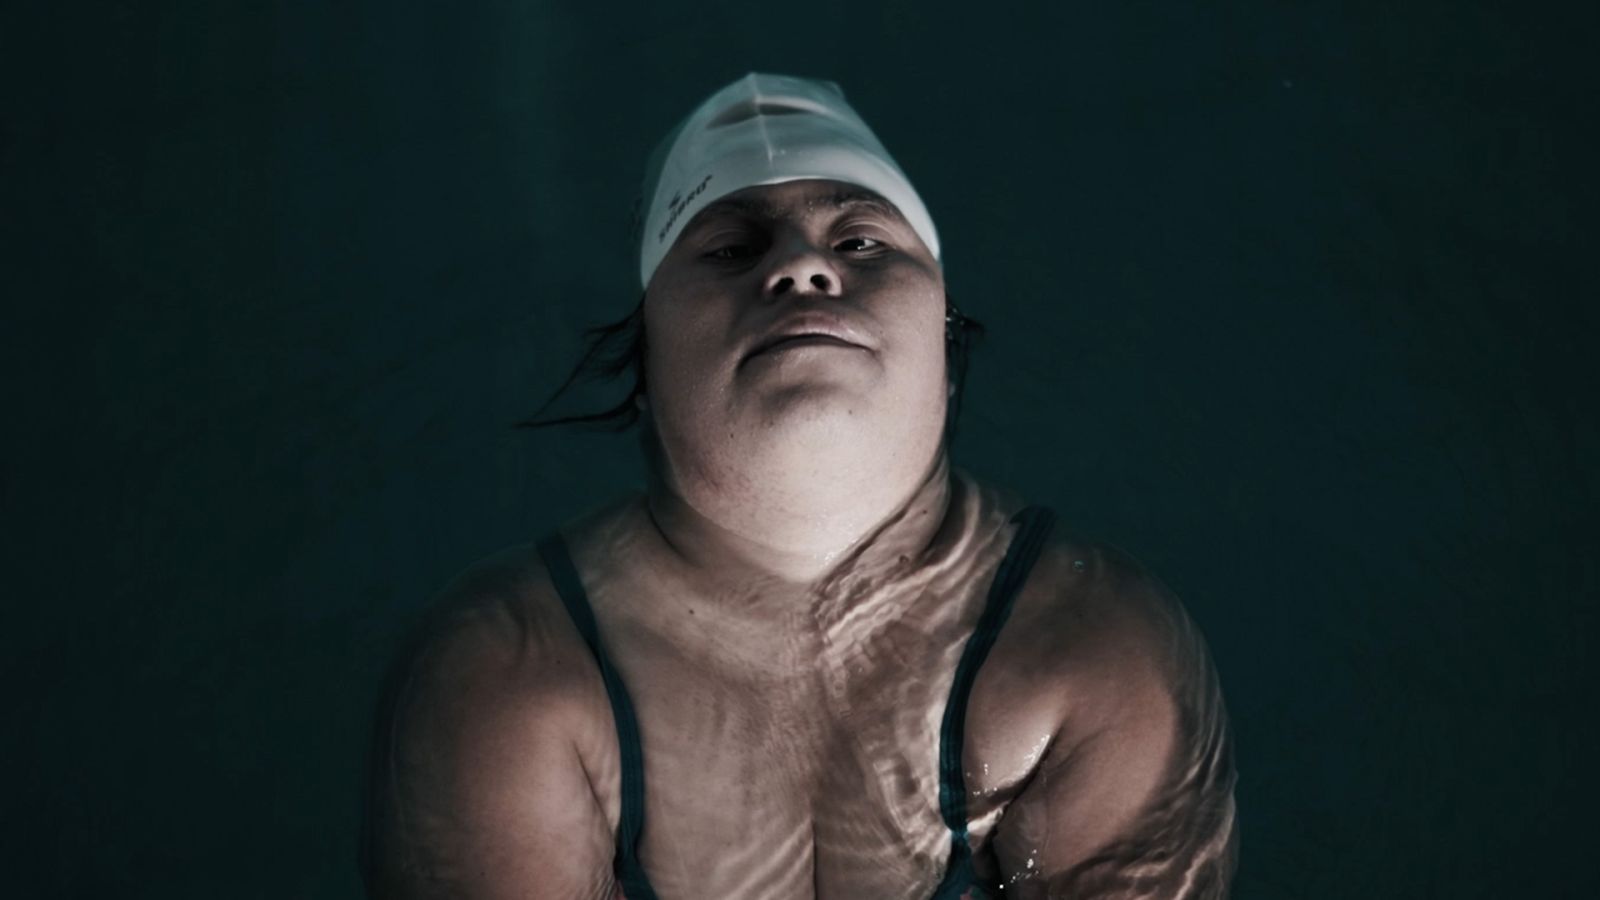 A Swimmer With Down Syndrome Redefines the Perception of Disability